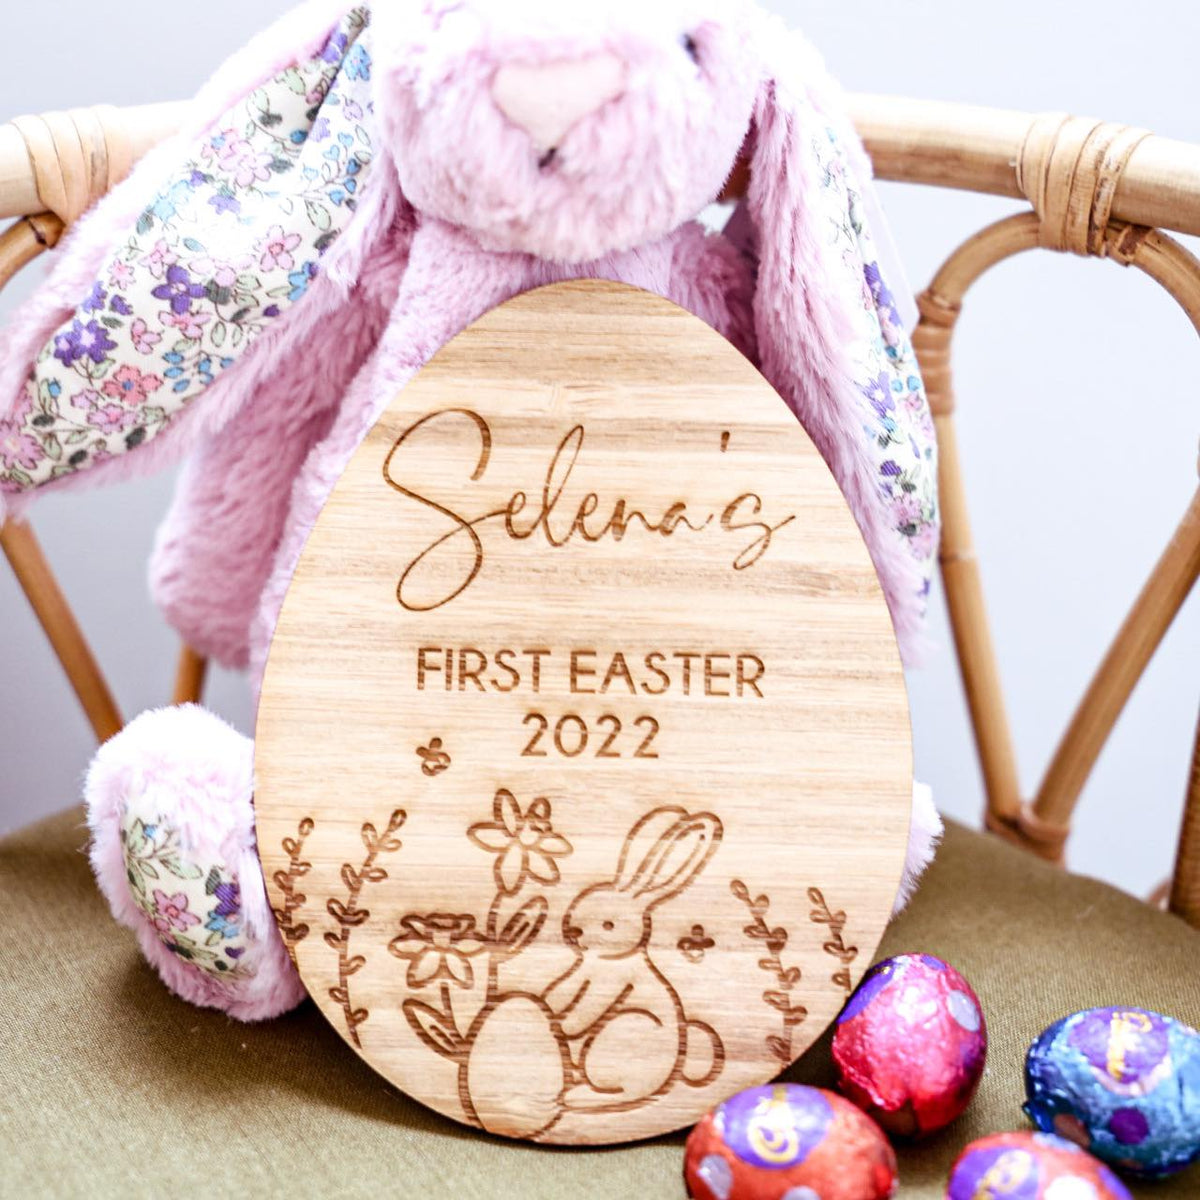 My First Easter Milestone Card- Bunny Design